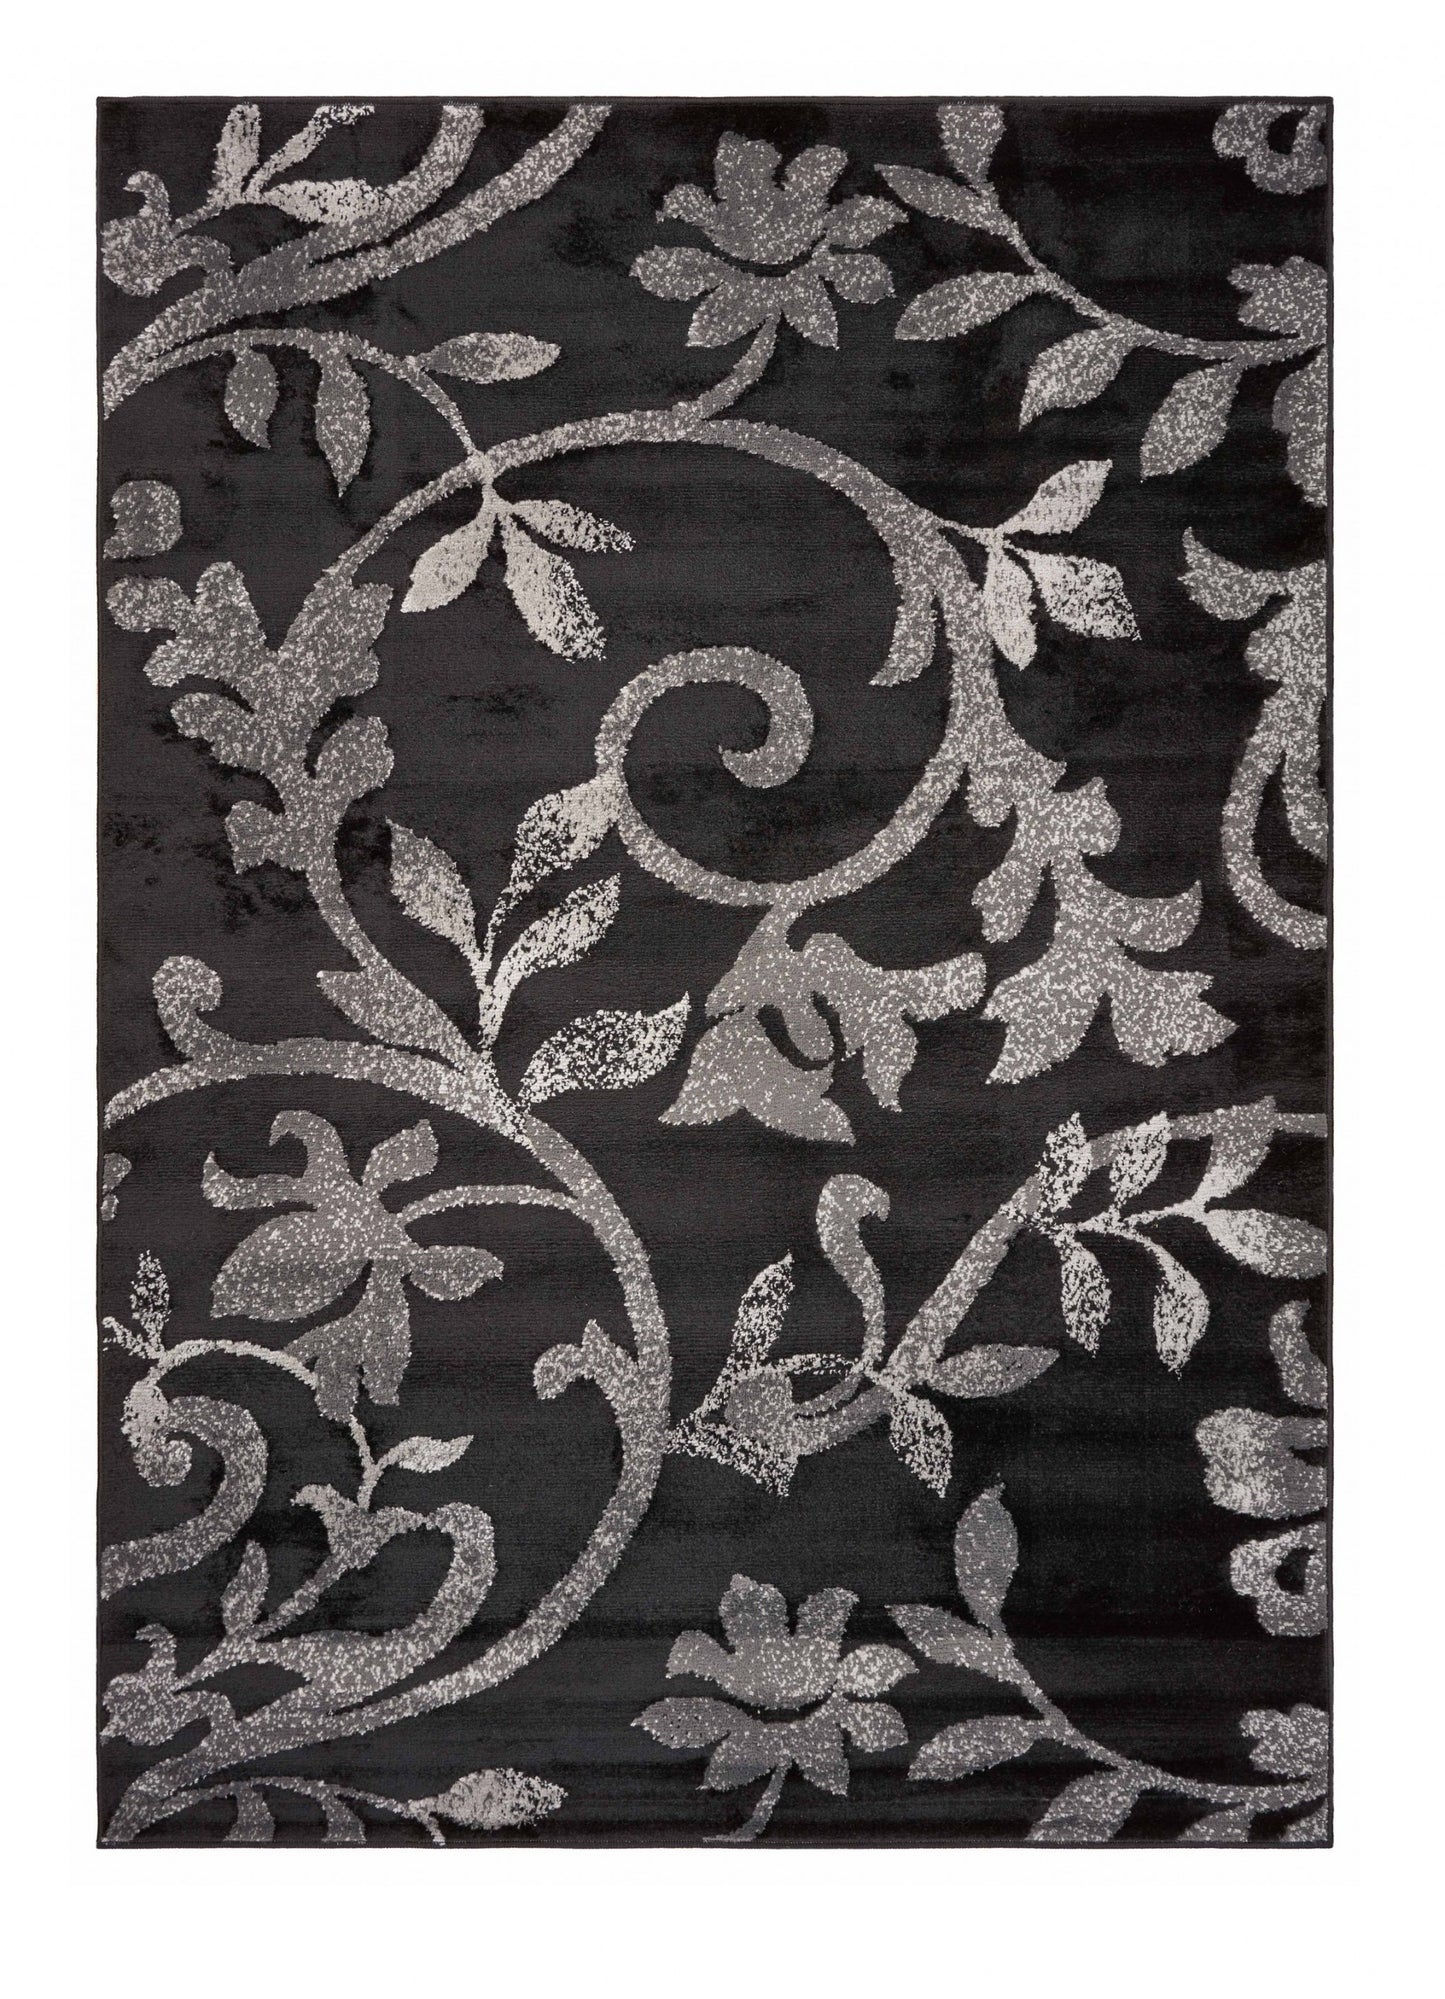 5' x 7' Black Gray and White Floral Vines Area Rug